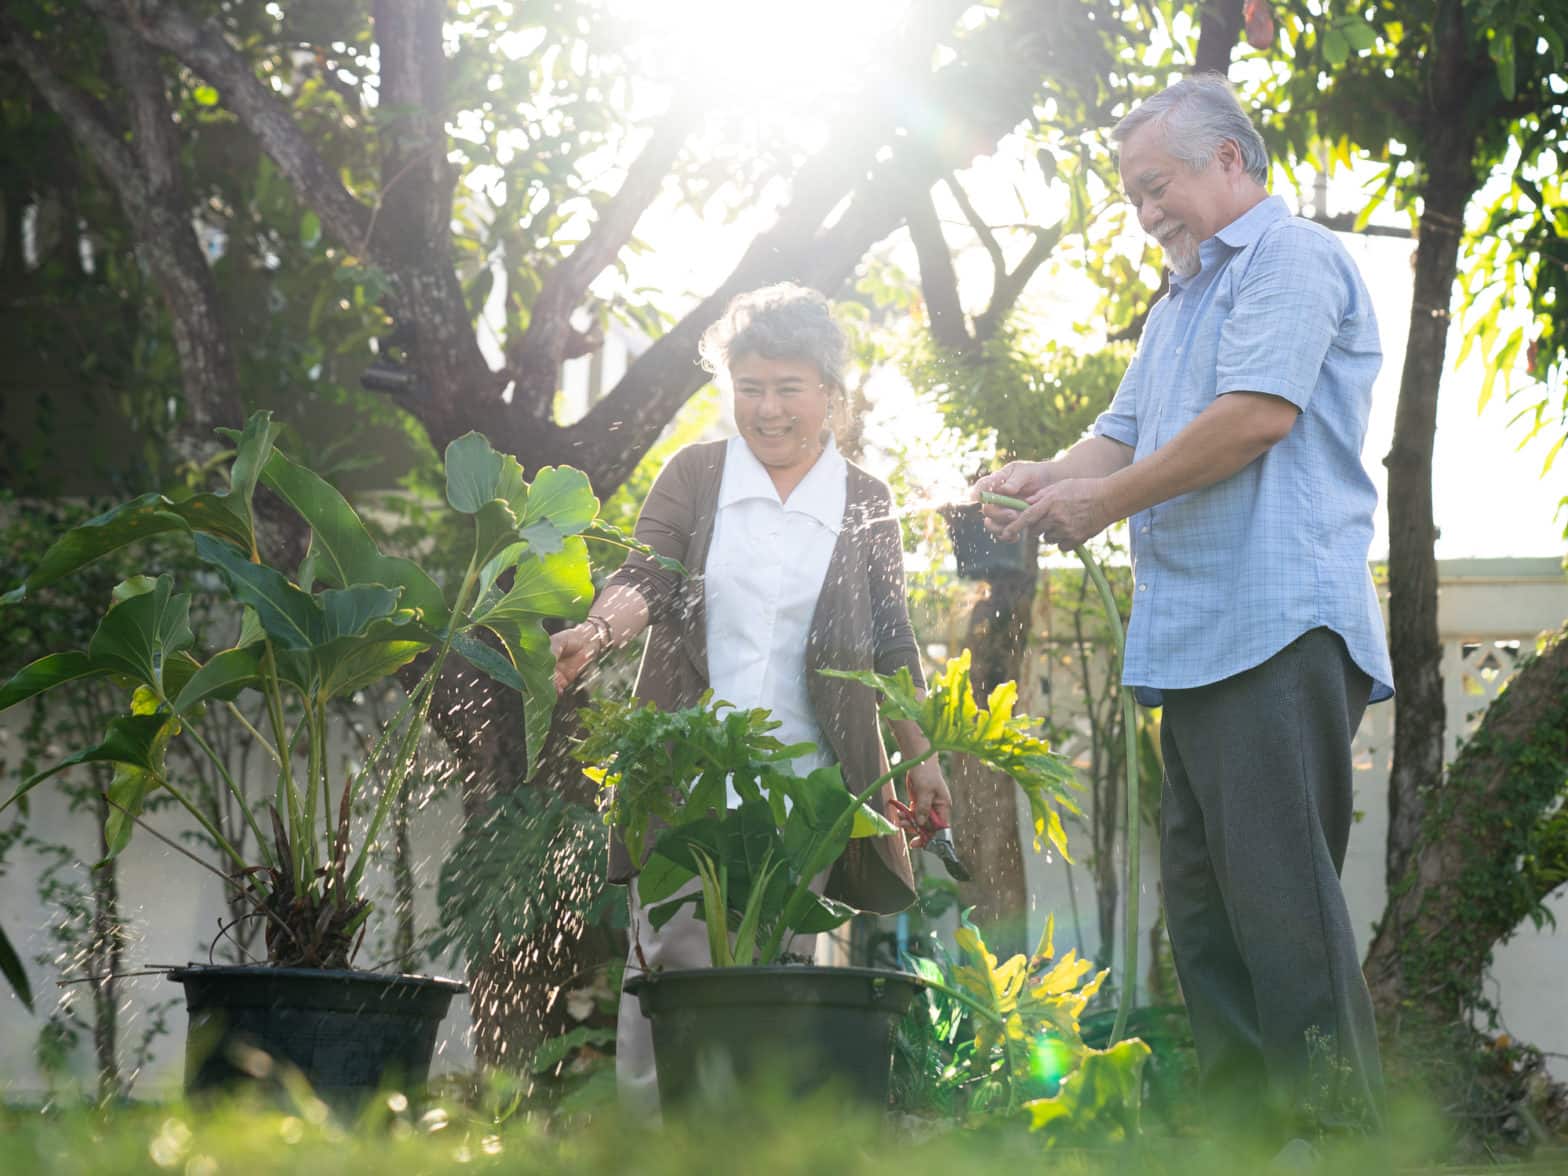 A retired couple spend time together tending to their garden